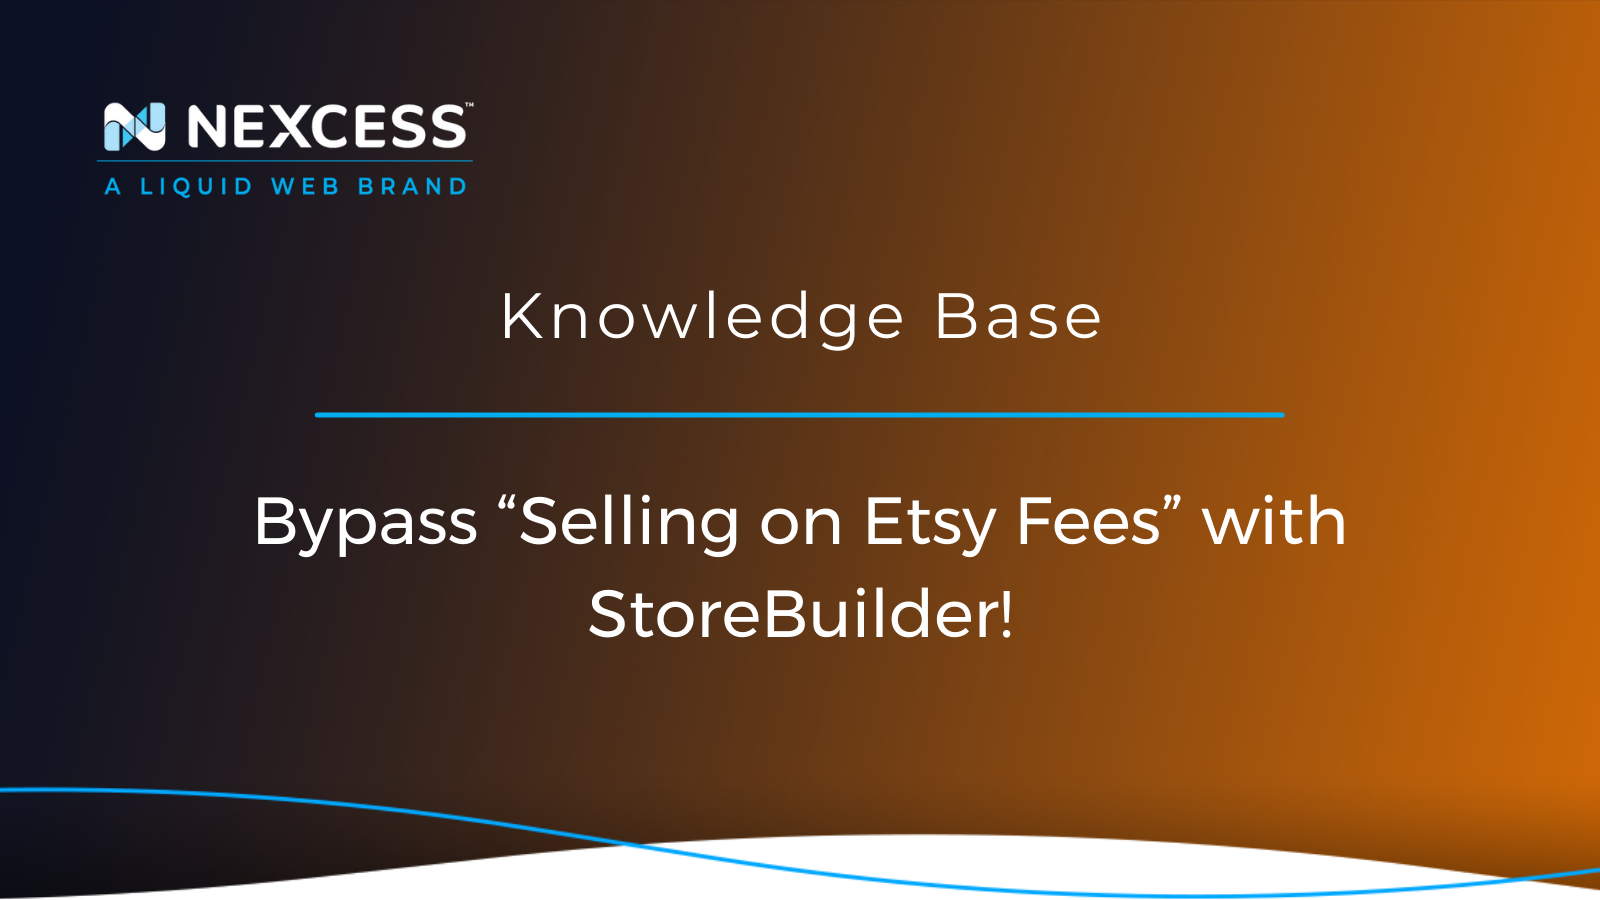 Bypass “Selling on Etsy Fees” with StoreBuilder